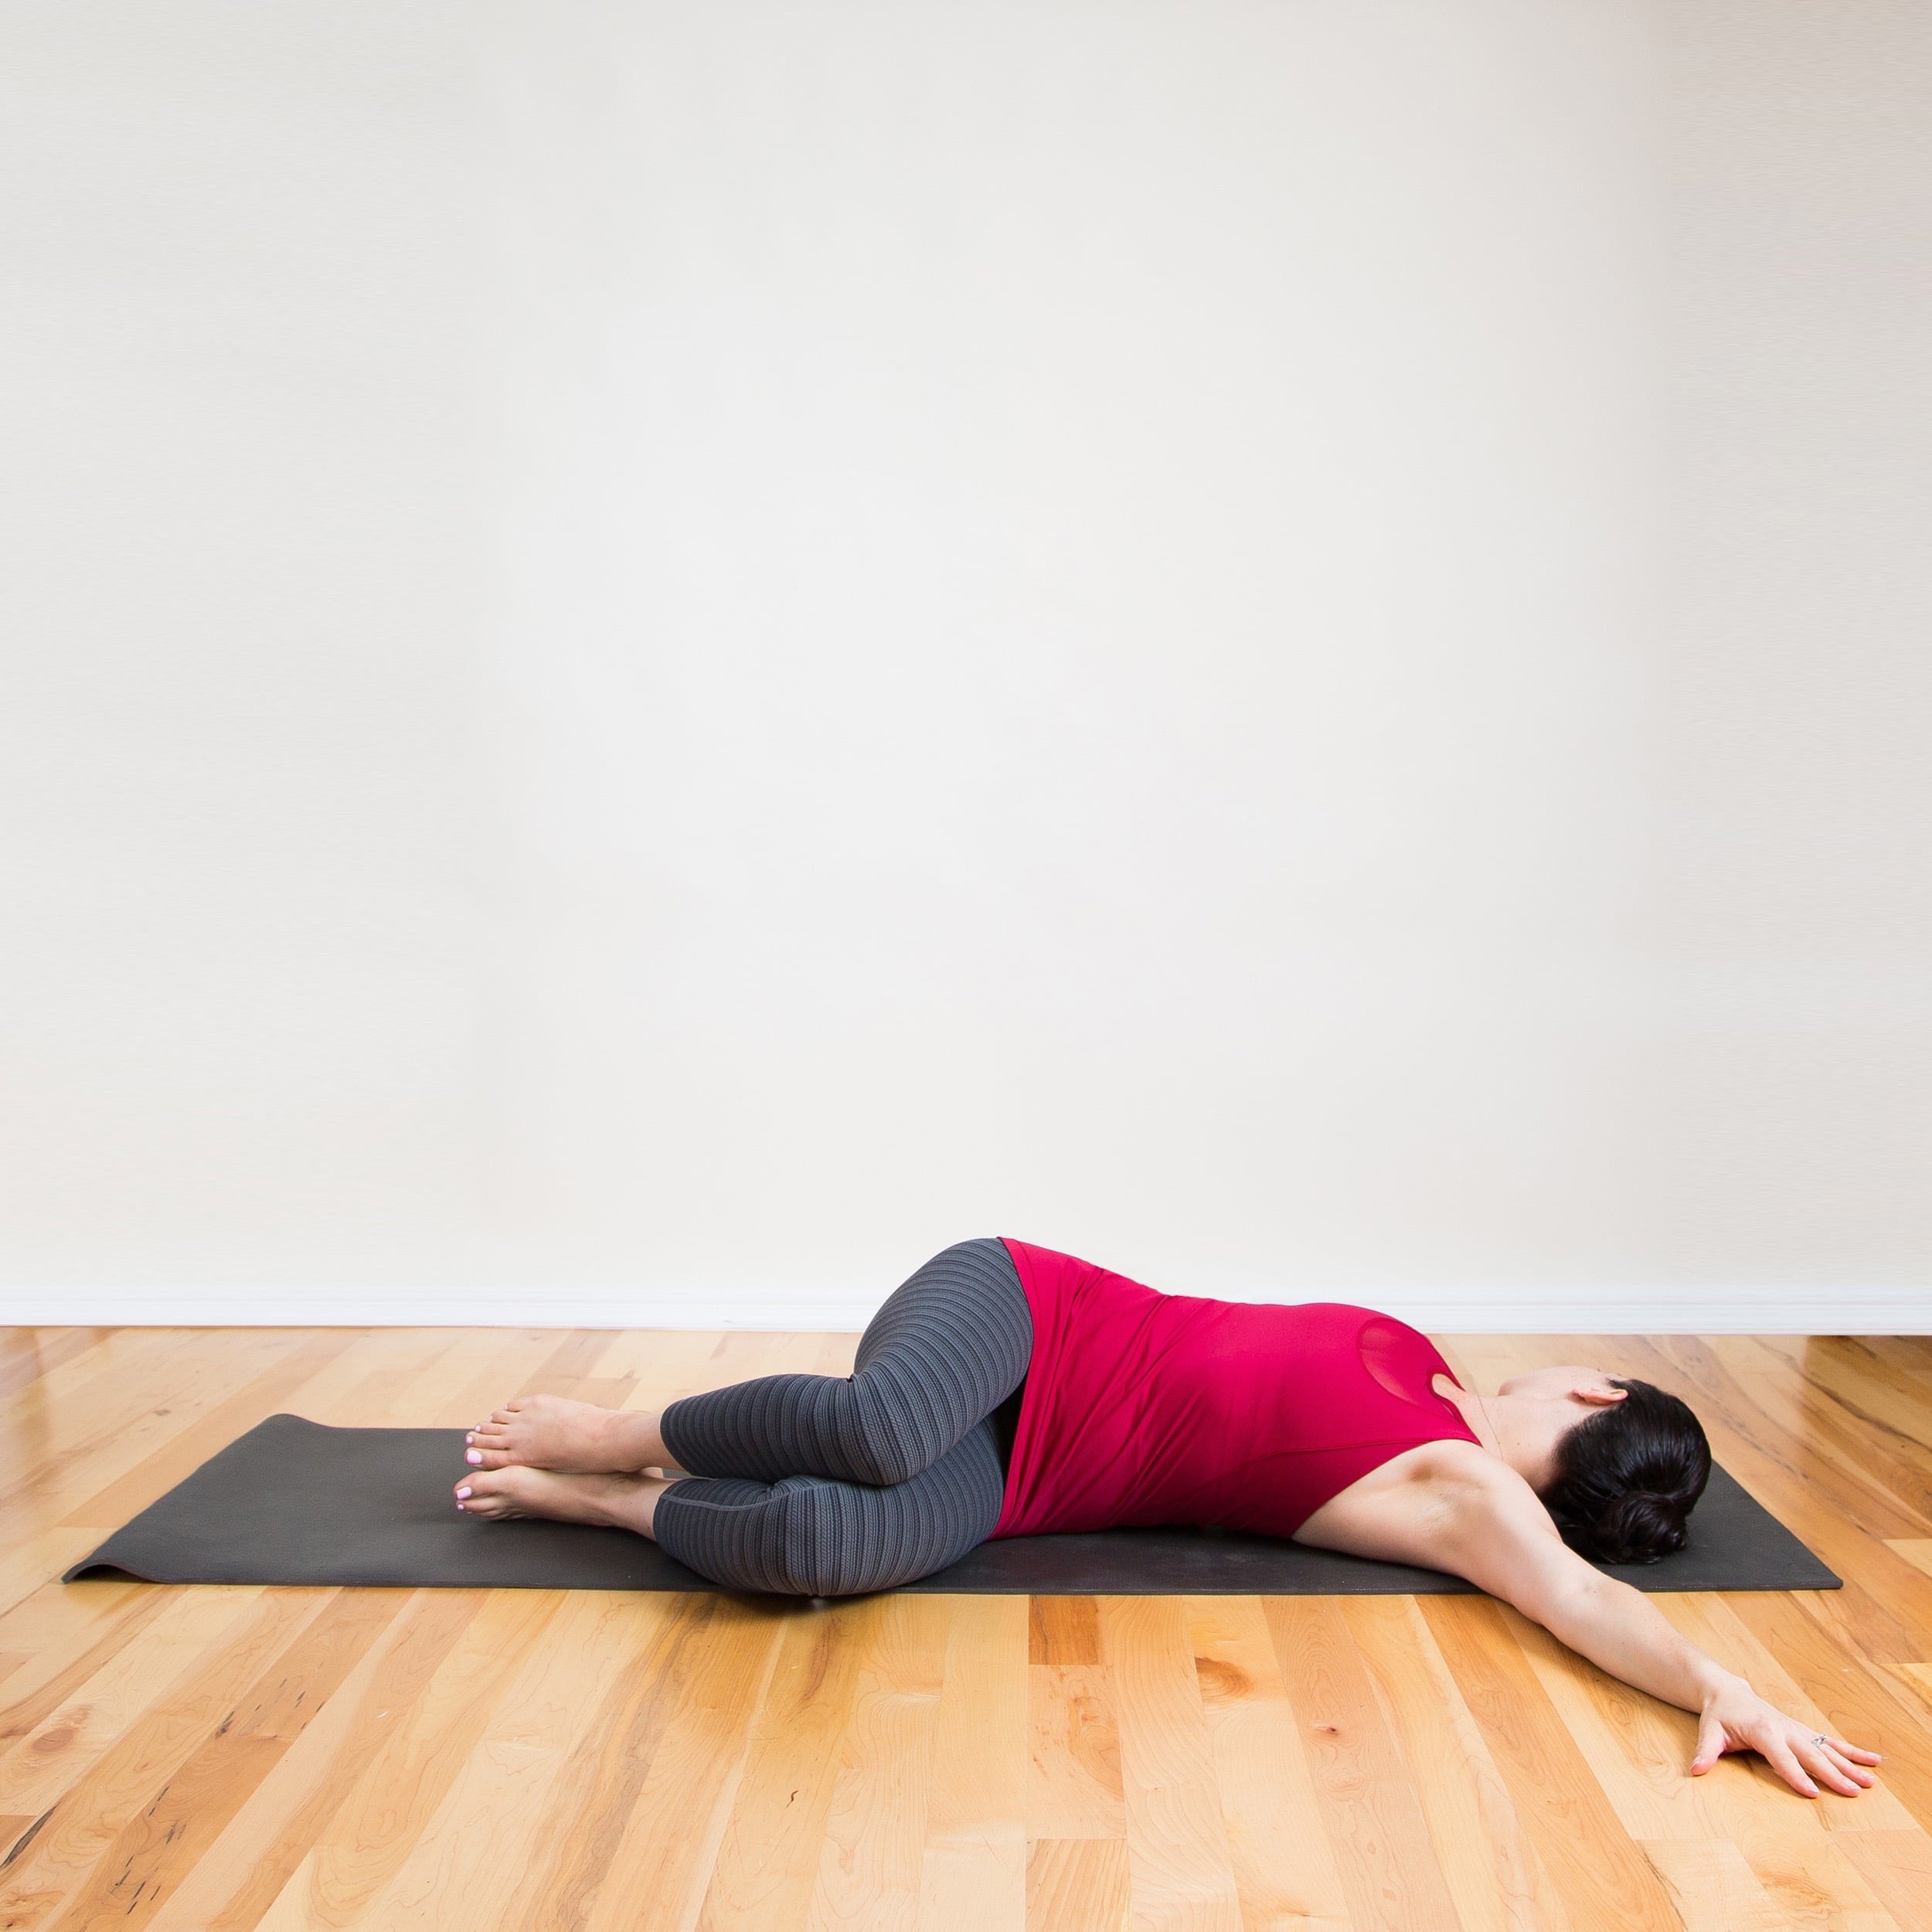 LYING OUTER THIGH STRETCH Lying flat on back, bring leg over and